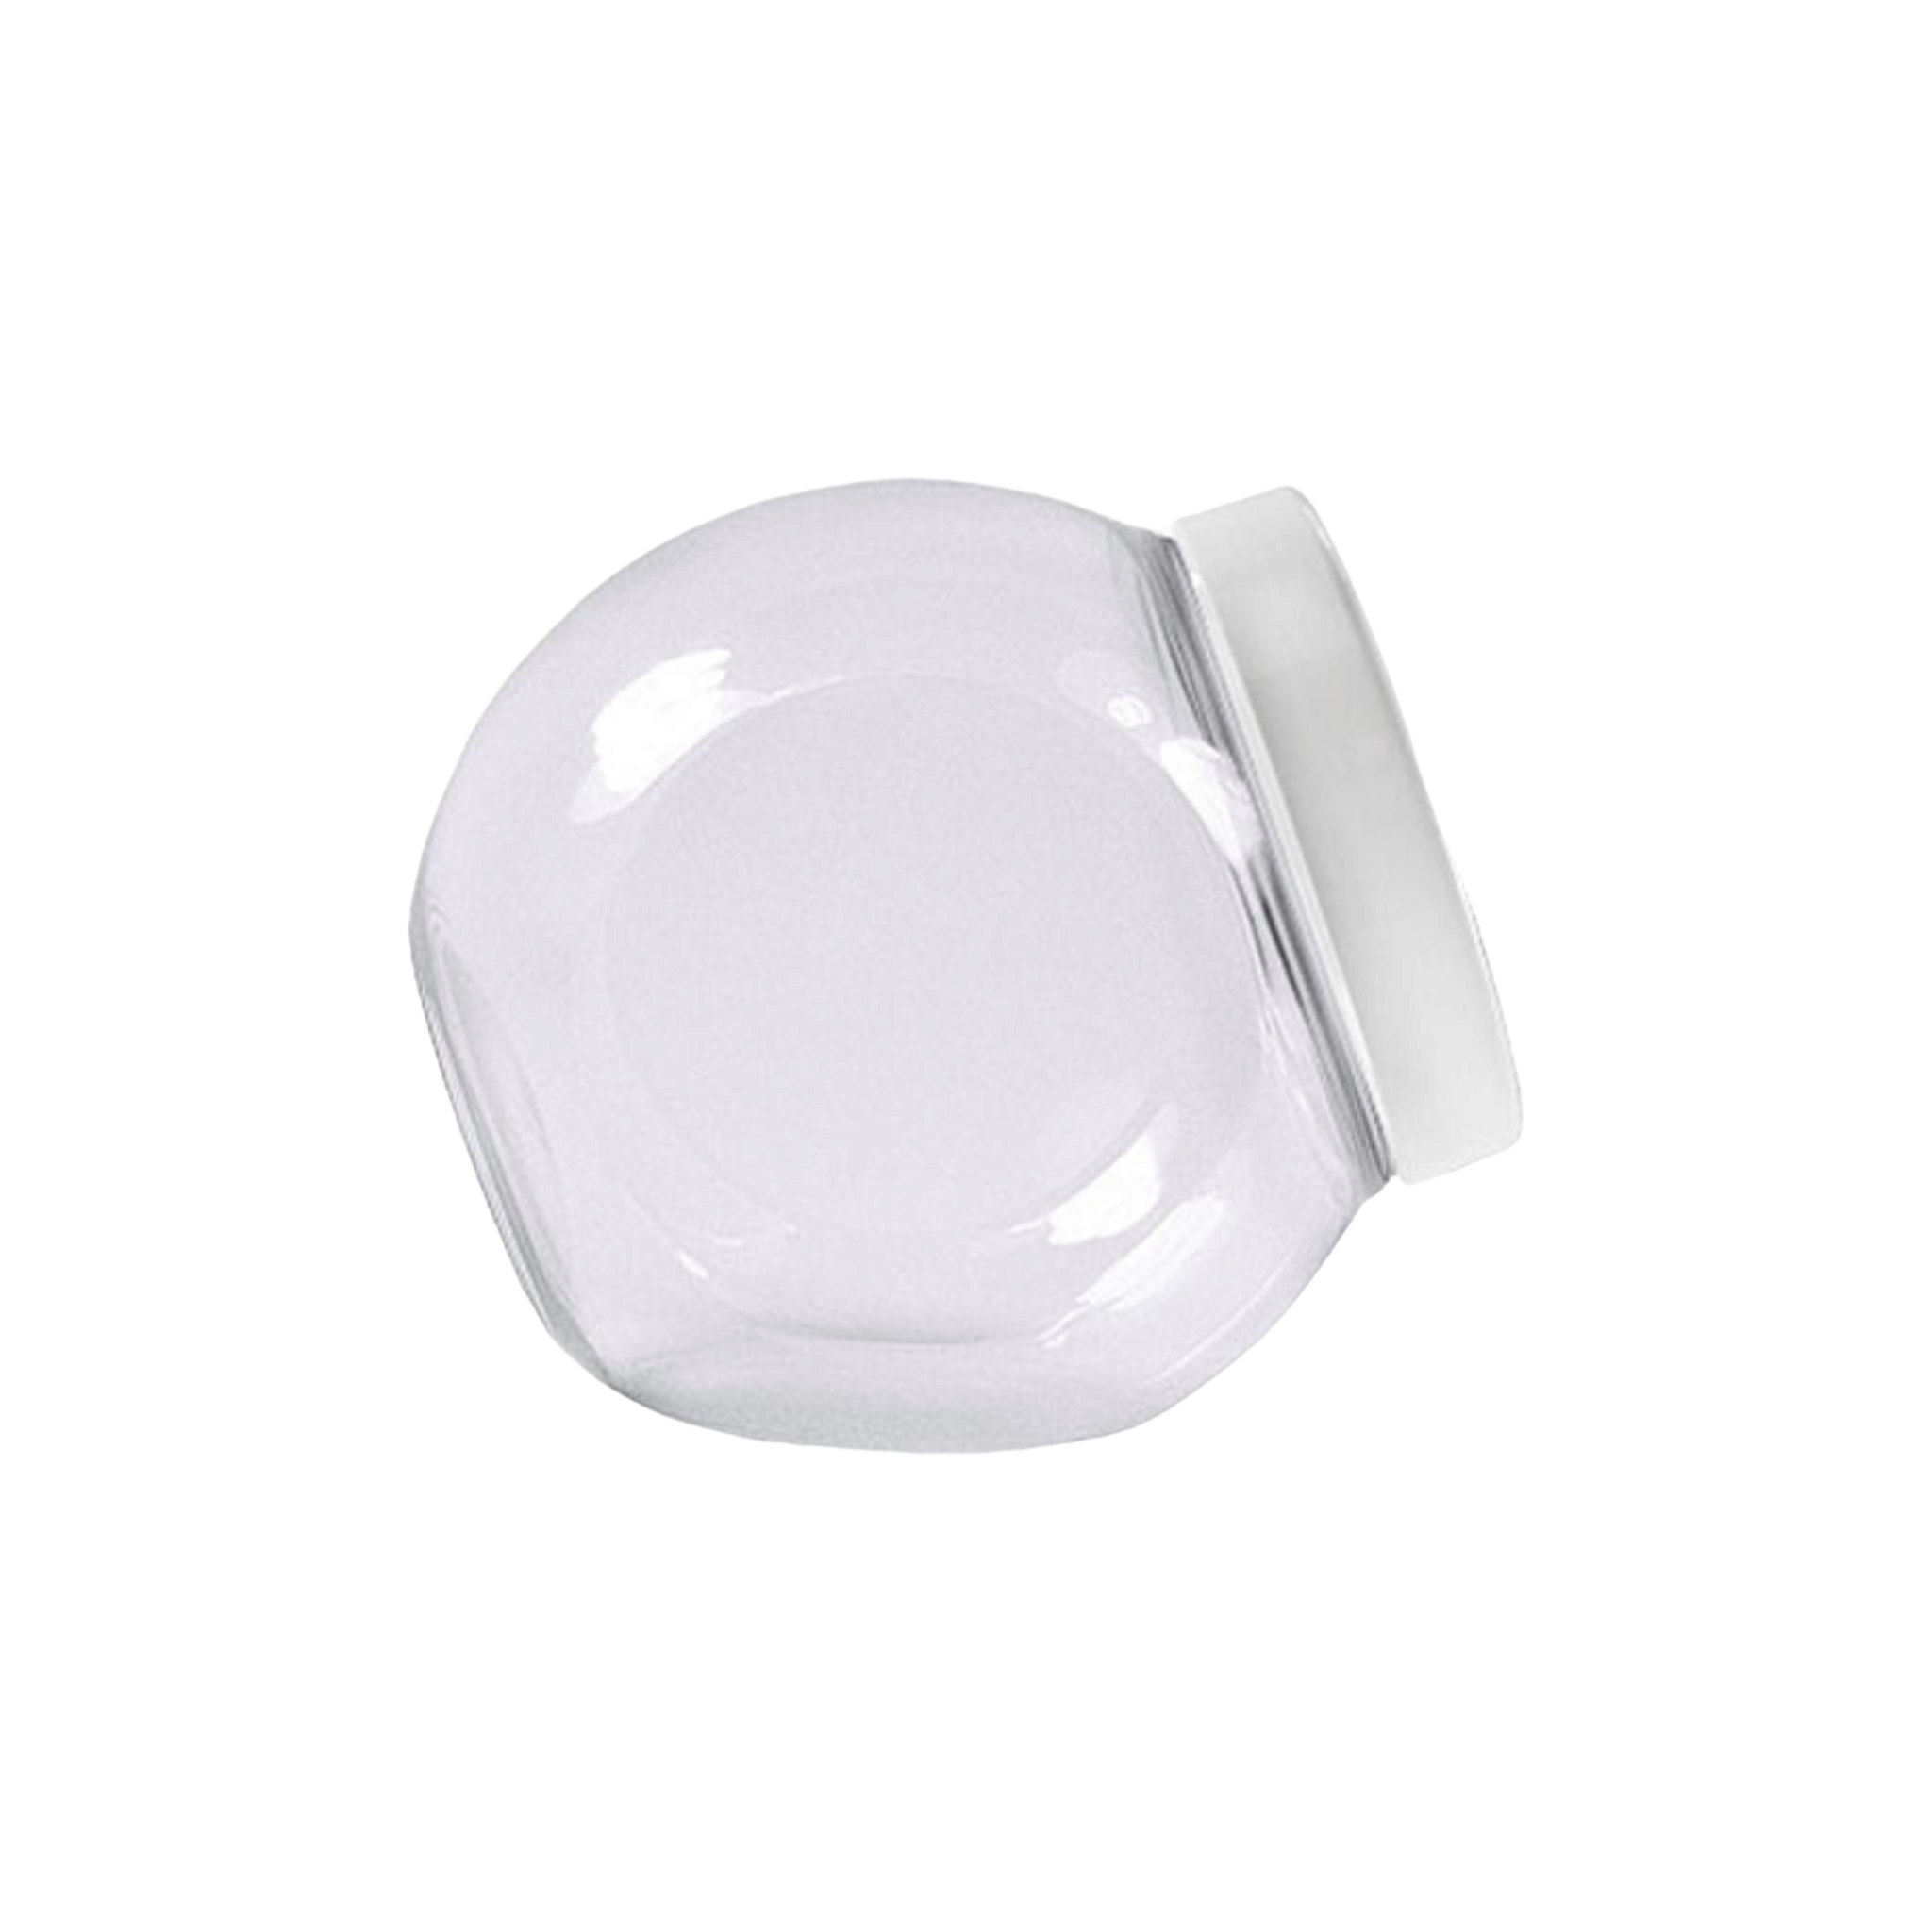 Plastic Spherical Angled Jar Round Bottle with White Lid